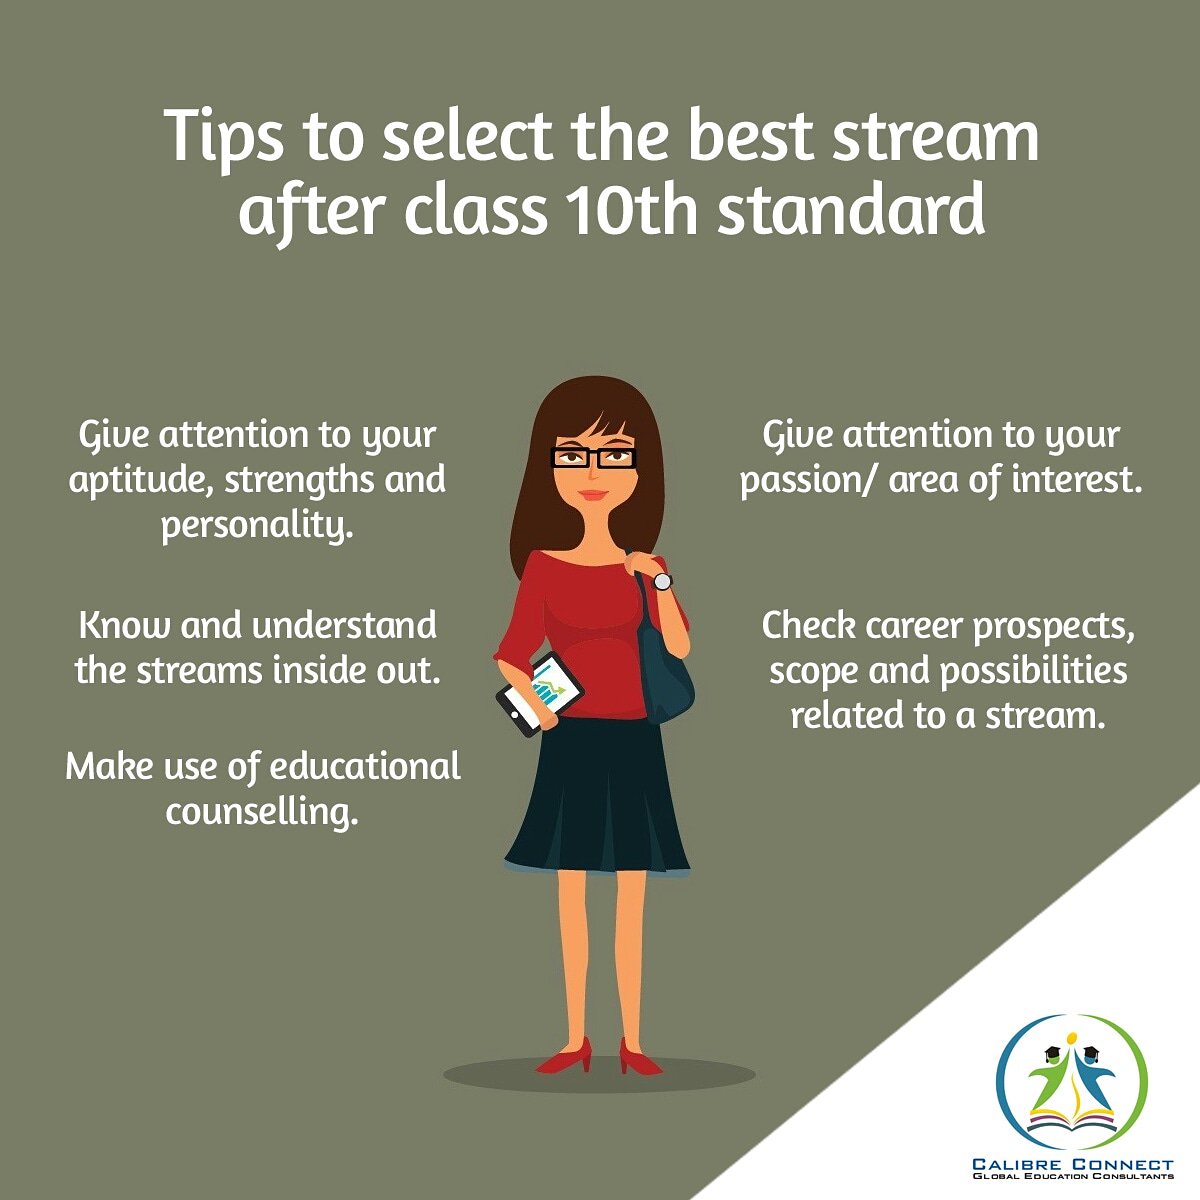 Checkout the tips to keep in mind while you select your stream after class 10th #calibreconnect #careercounselling #students #university #college #collegeadmission #admissionseason #careercousellor #careersuccess #streamselection #class10th